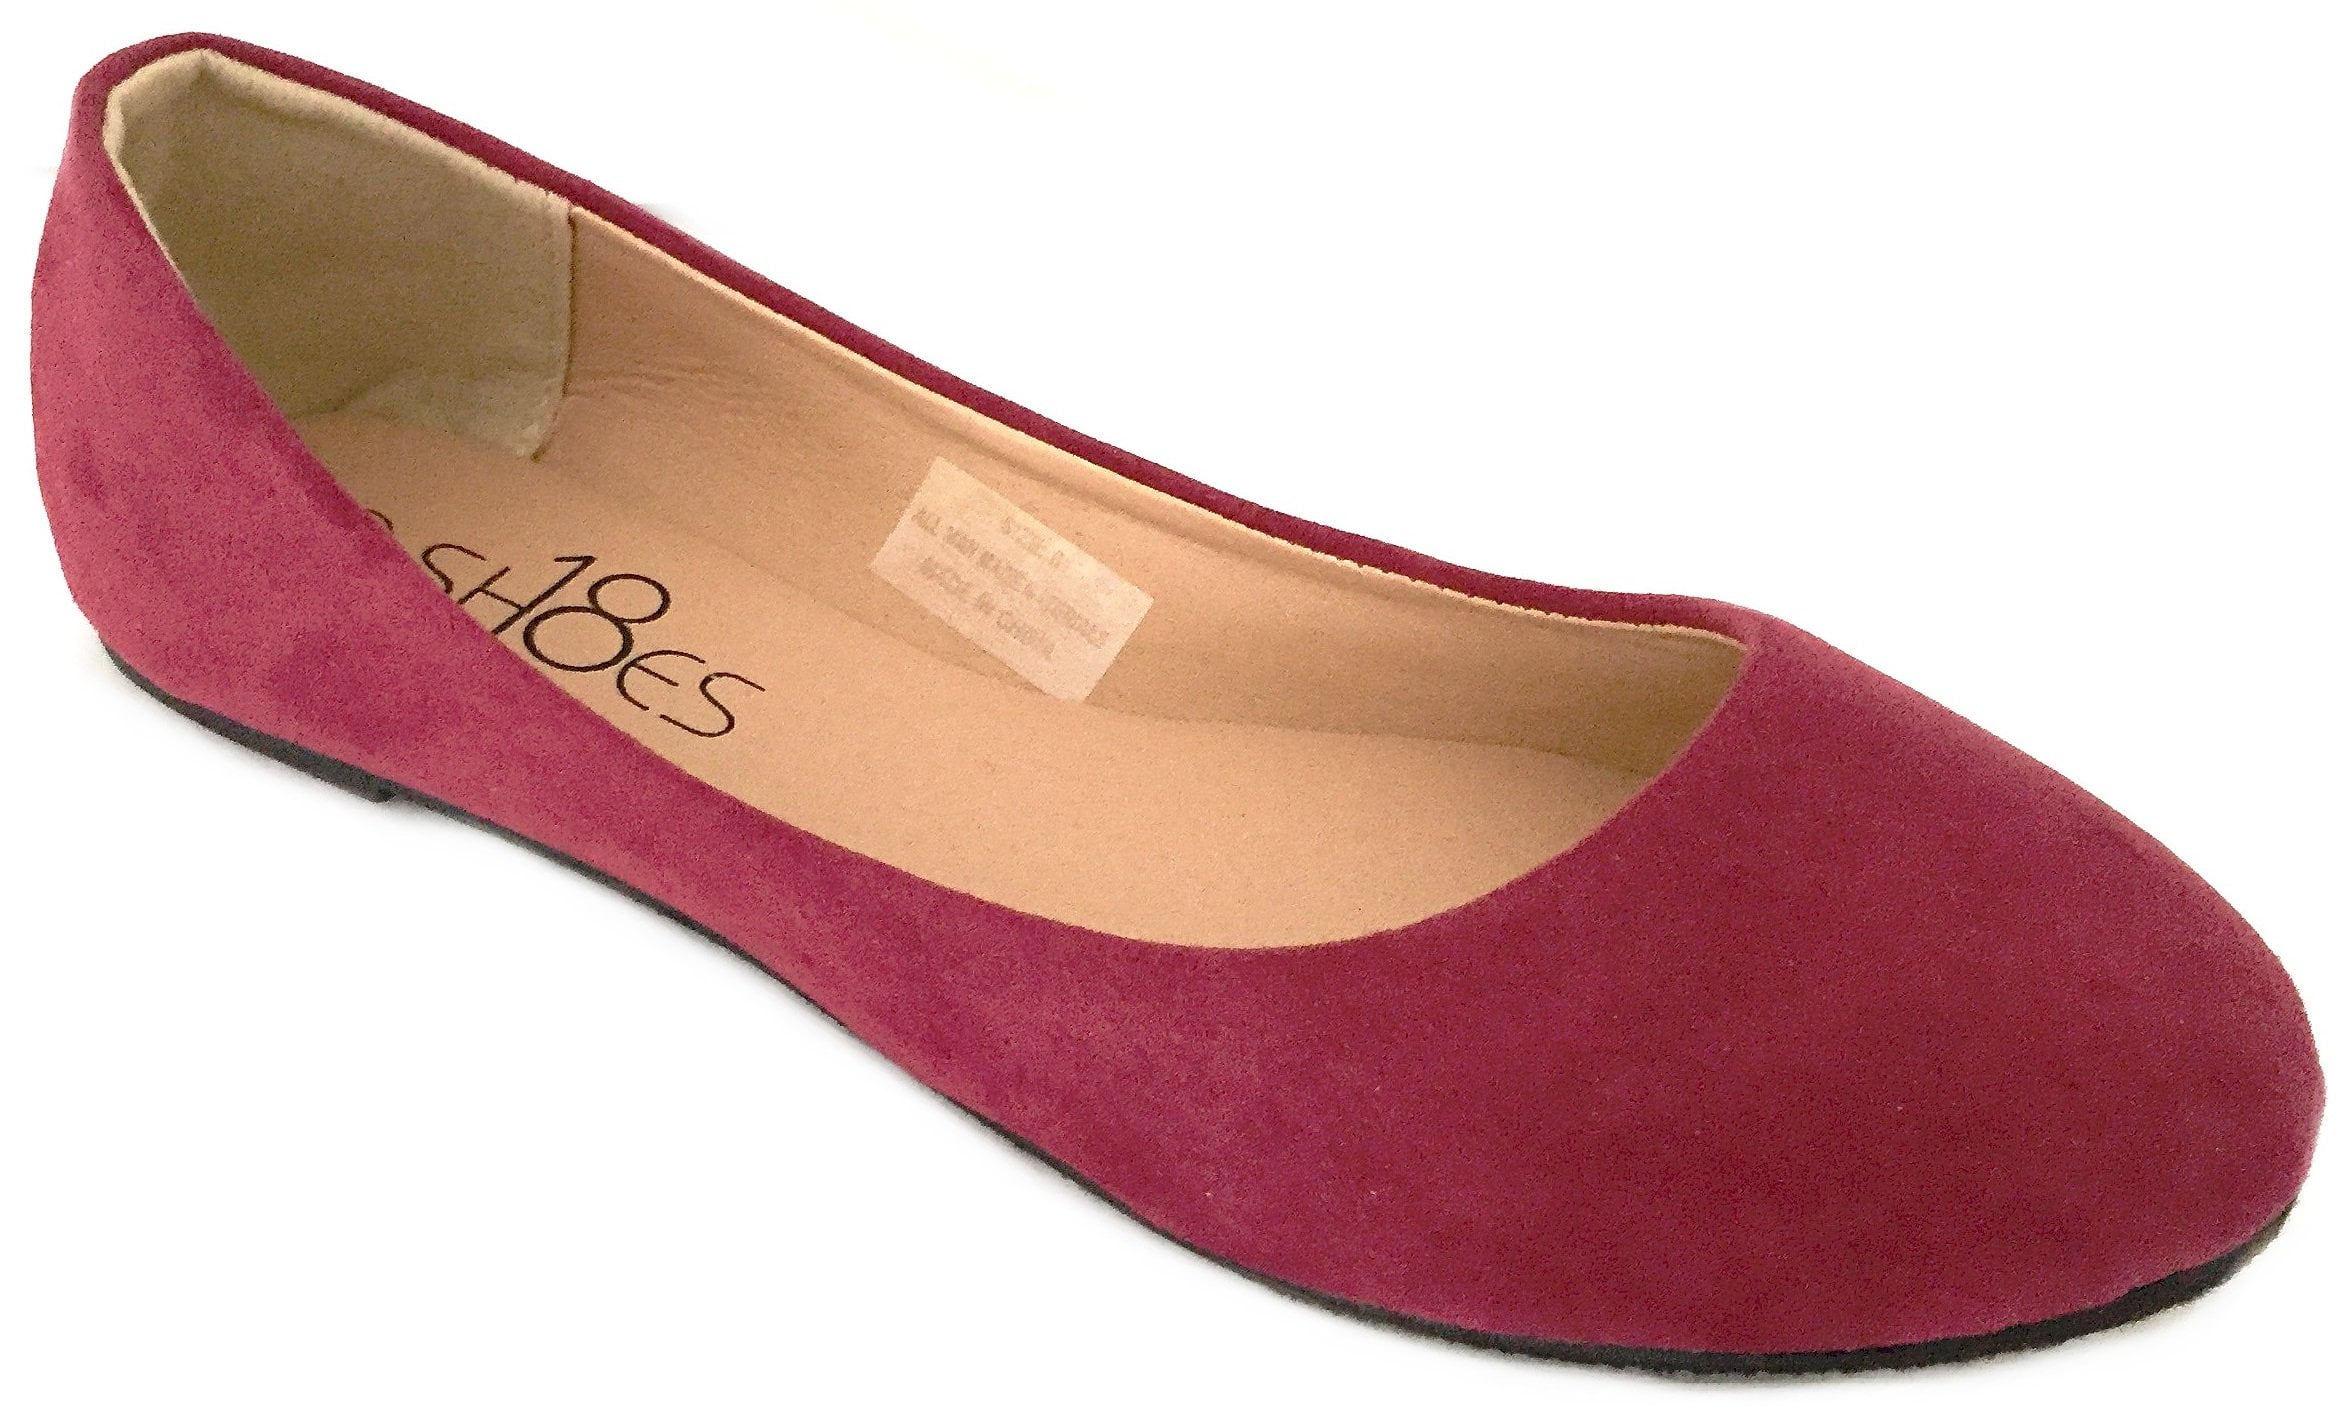 Shoes 18 Womens Classic Round Toe Ballerina Ballet Flat Shoes 8600 Maroon Micro 65